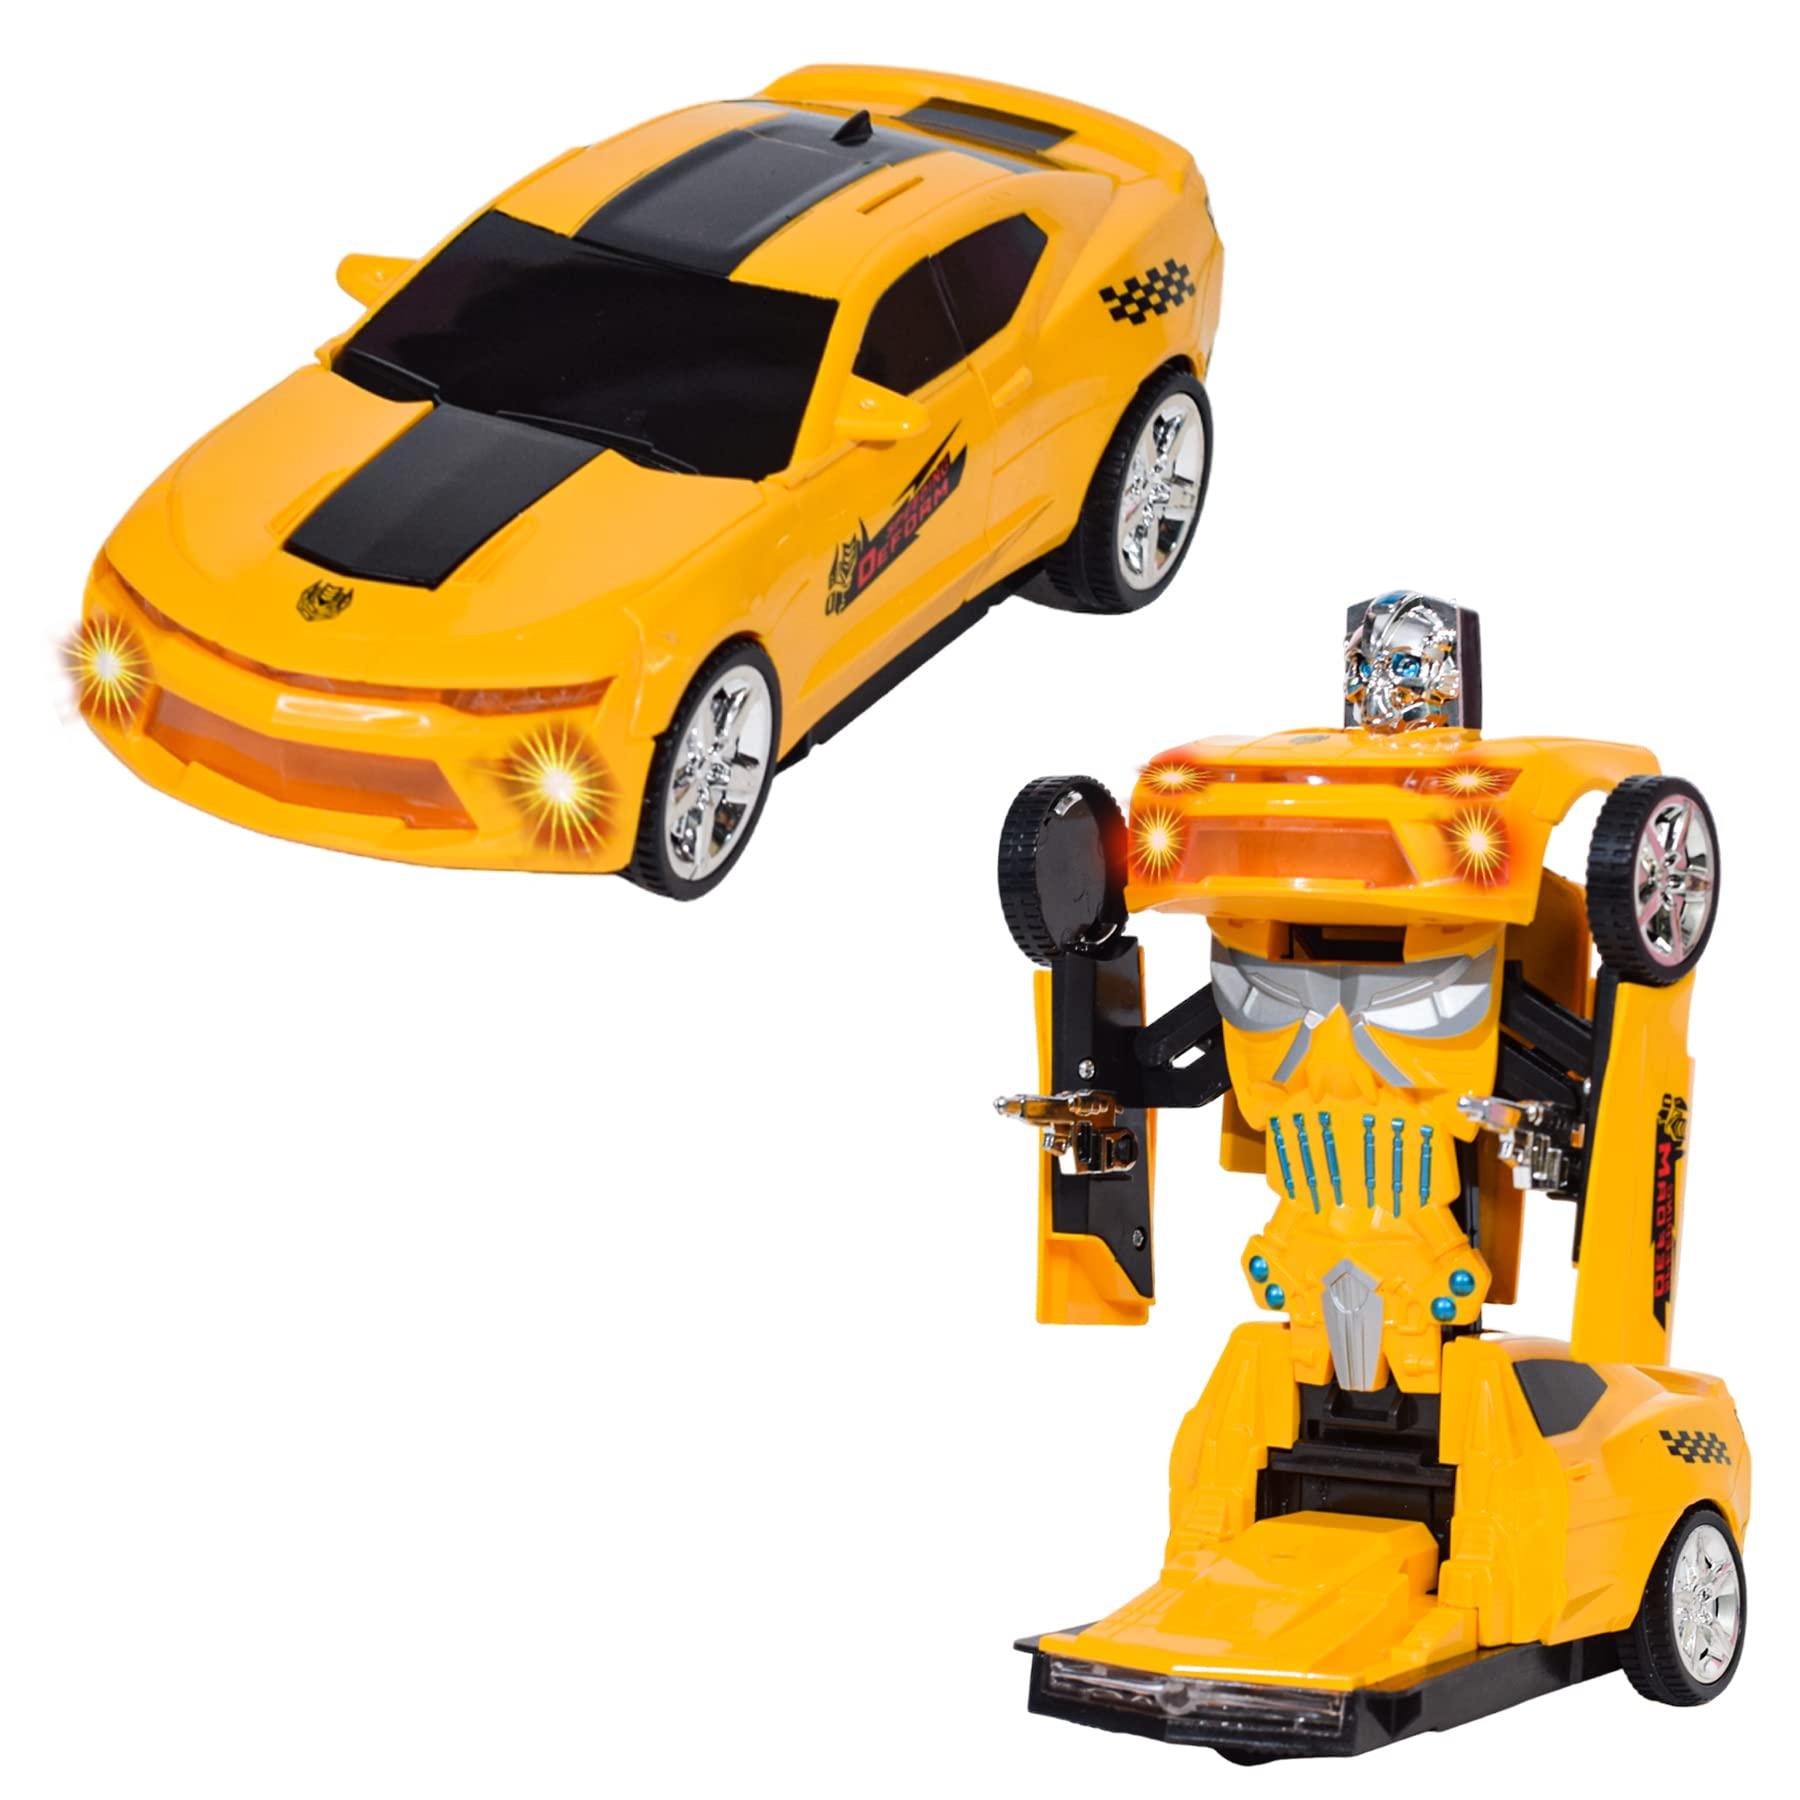 Remote Control Transformer Toys: Benefits of playing with remote control transformer toys